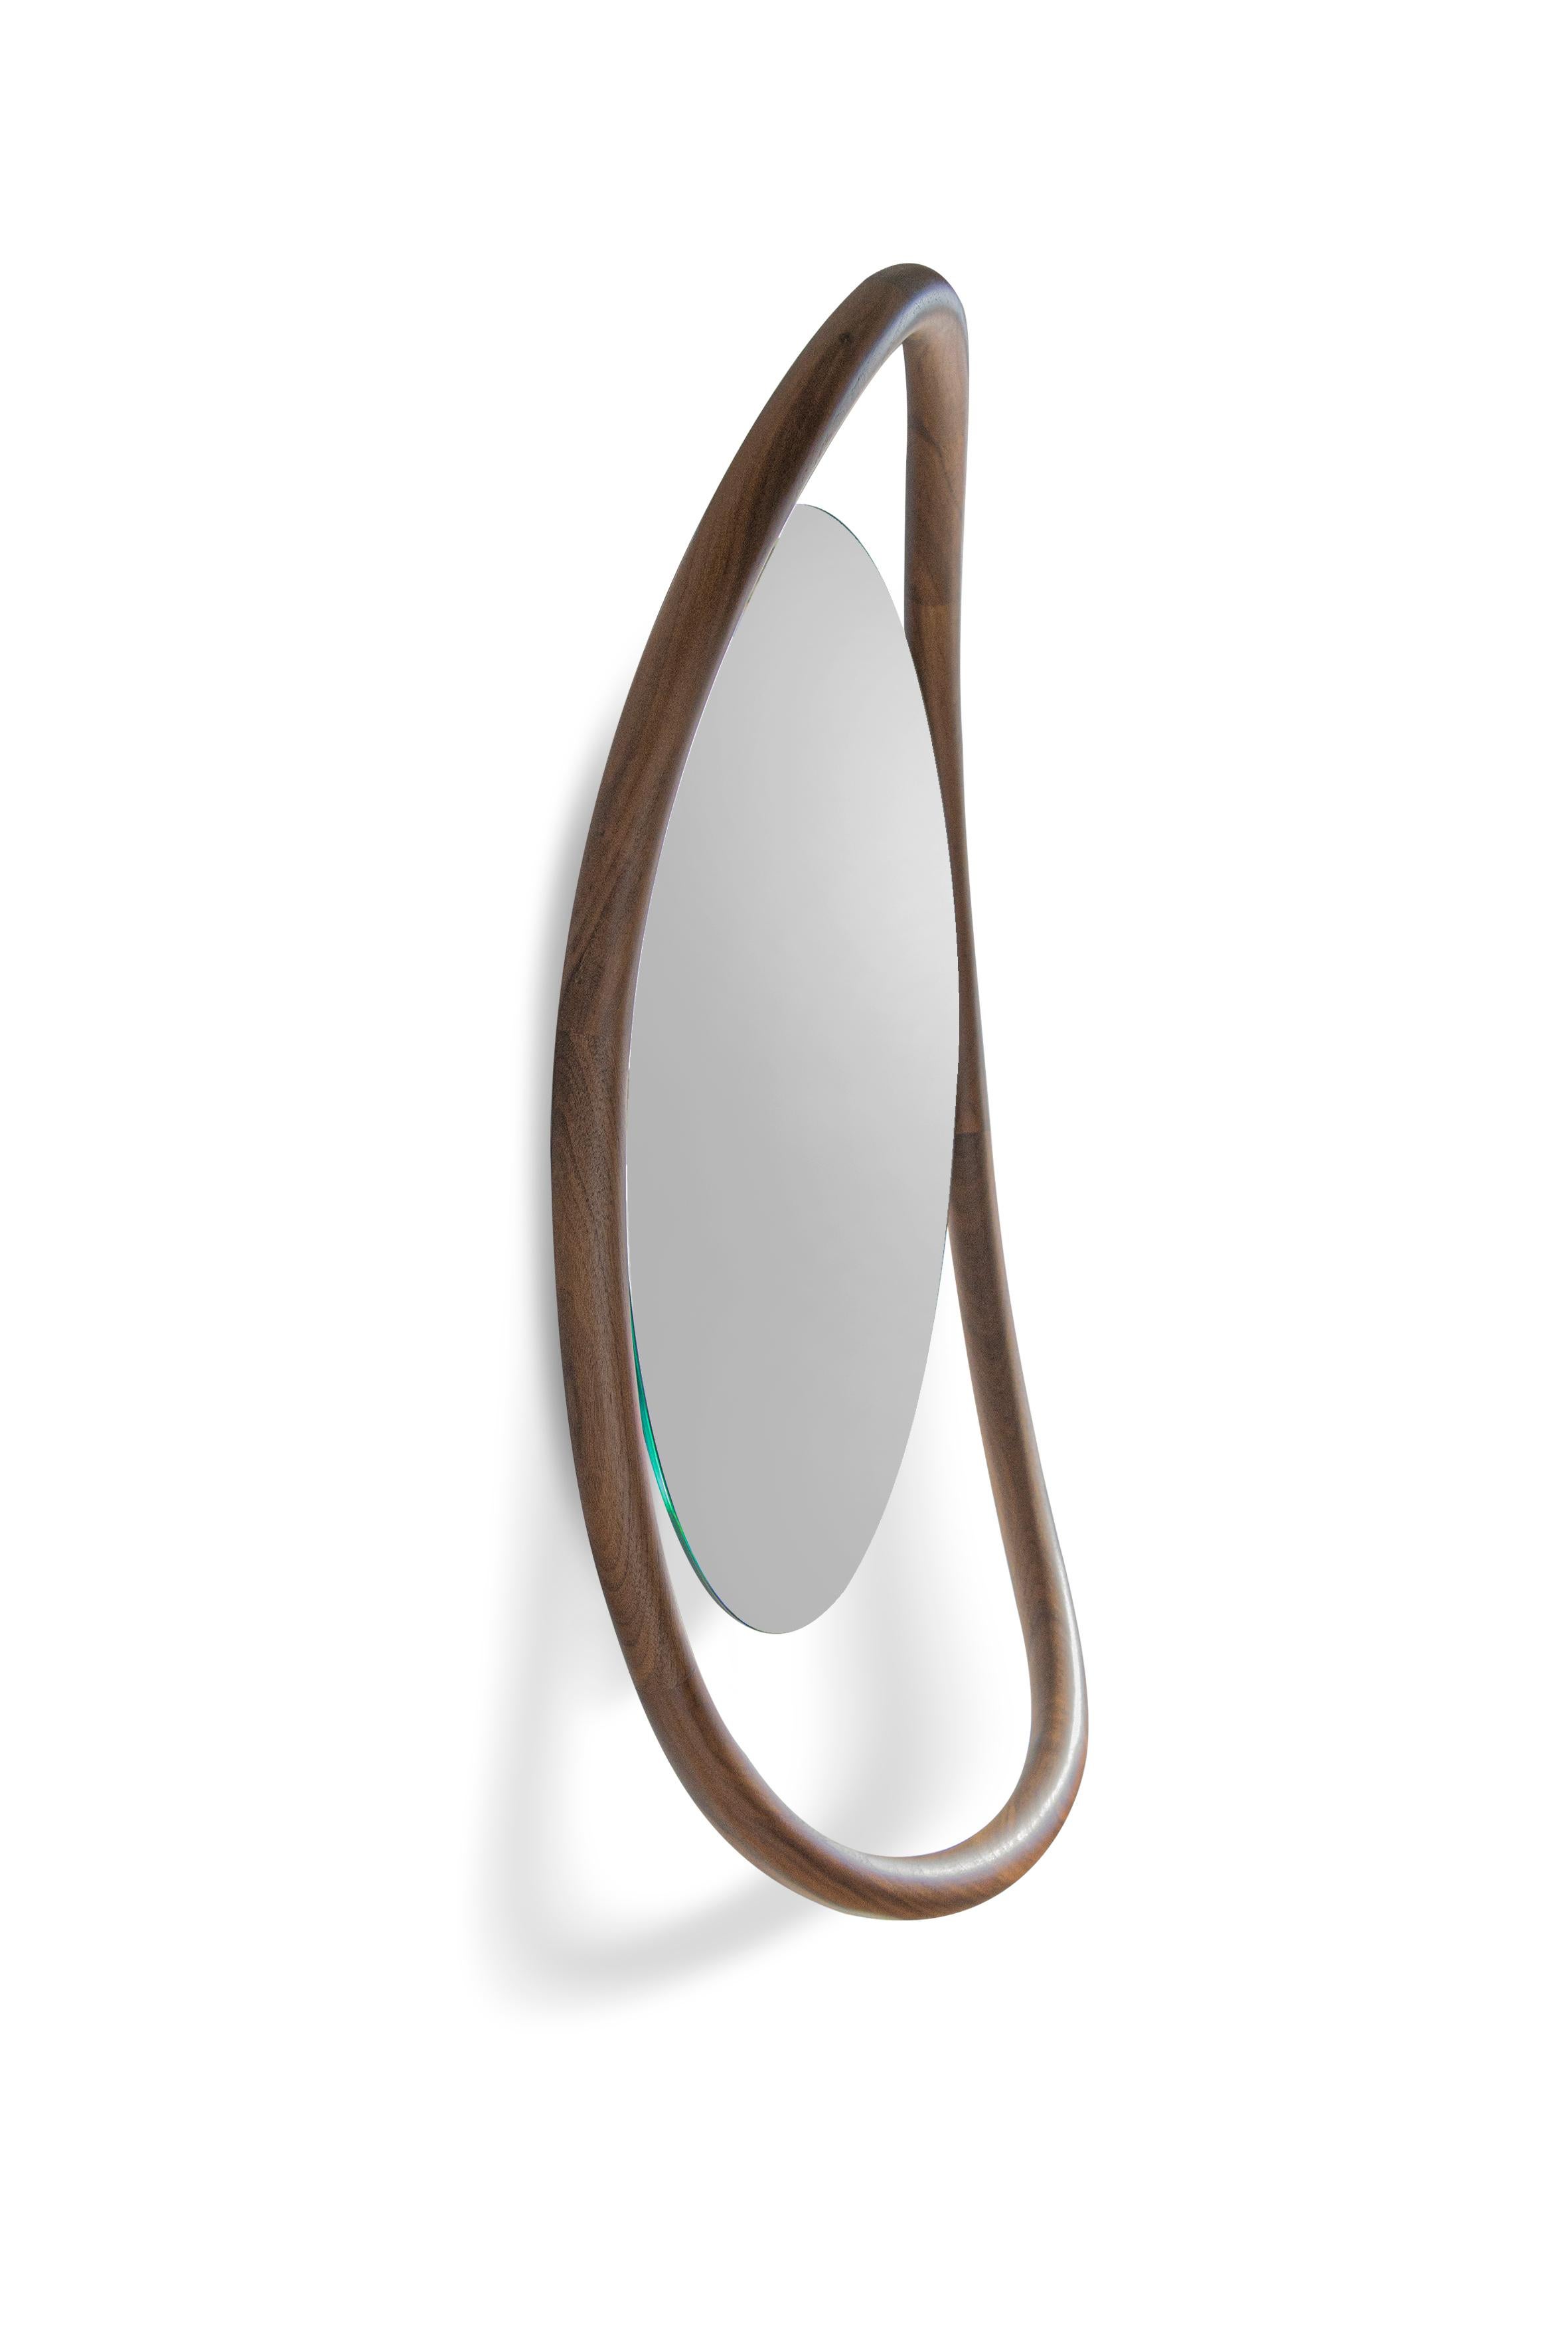 The singularity of this mirror is based on its caring proportions.
Two options with floor-standing mirror or wall-mirror; a hand-made natural walnut shelf combines the softness lines of the mirror.

Available in 
Walnut
Black Stained Ash